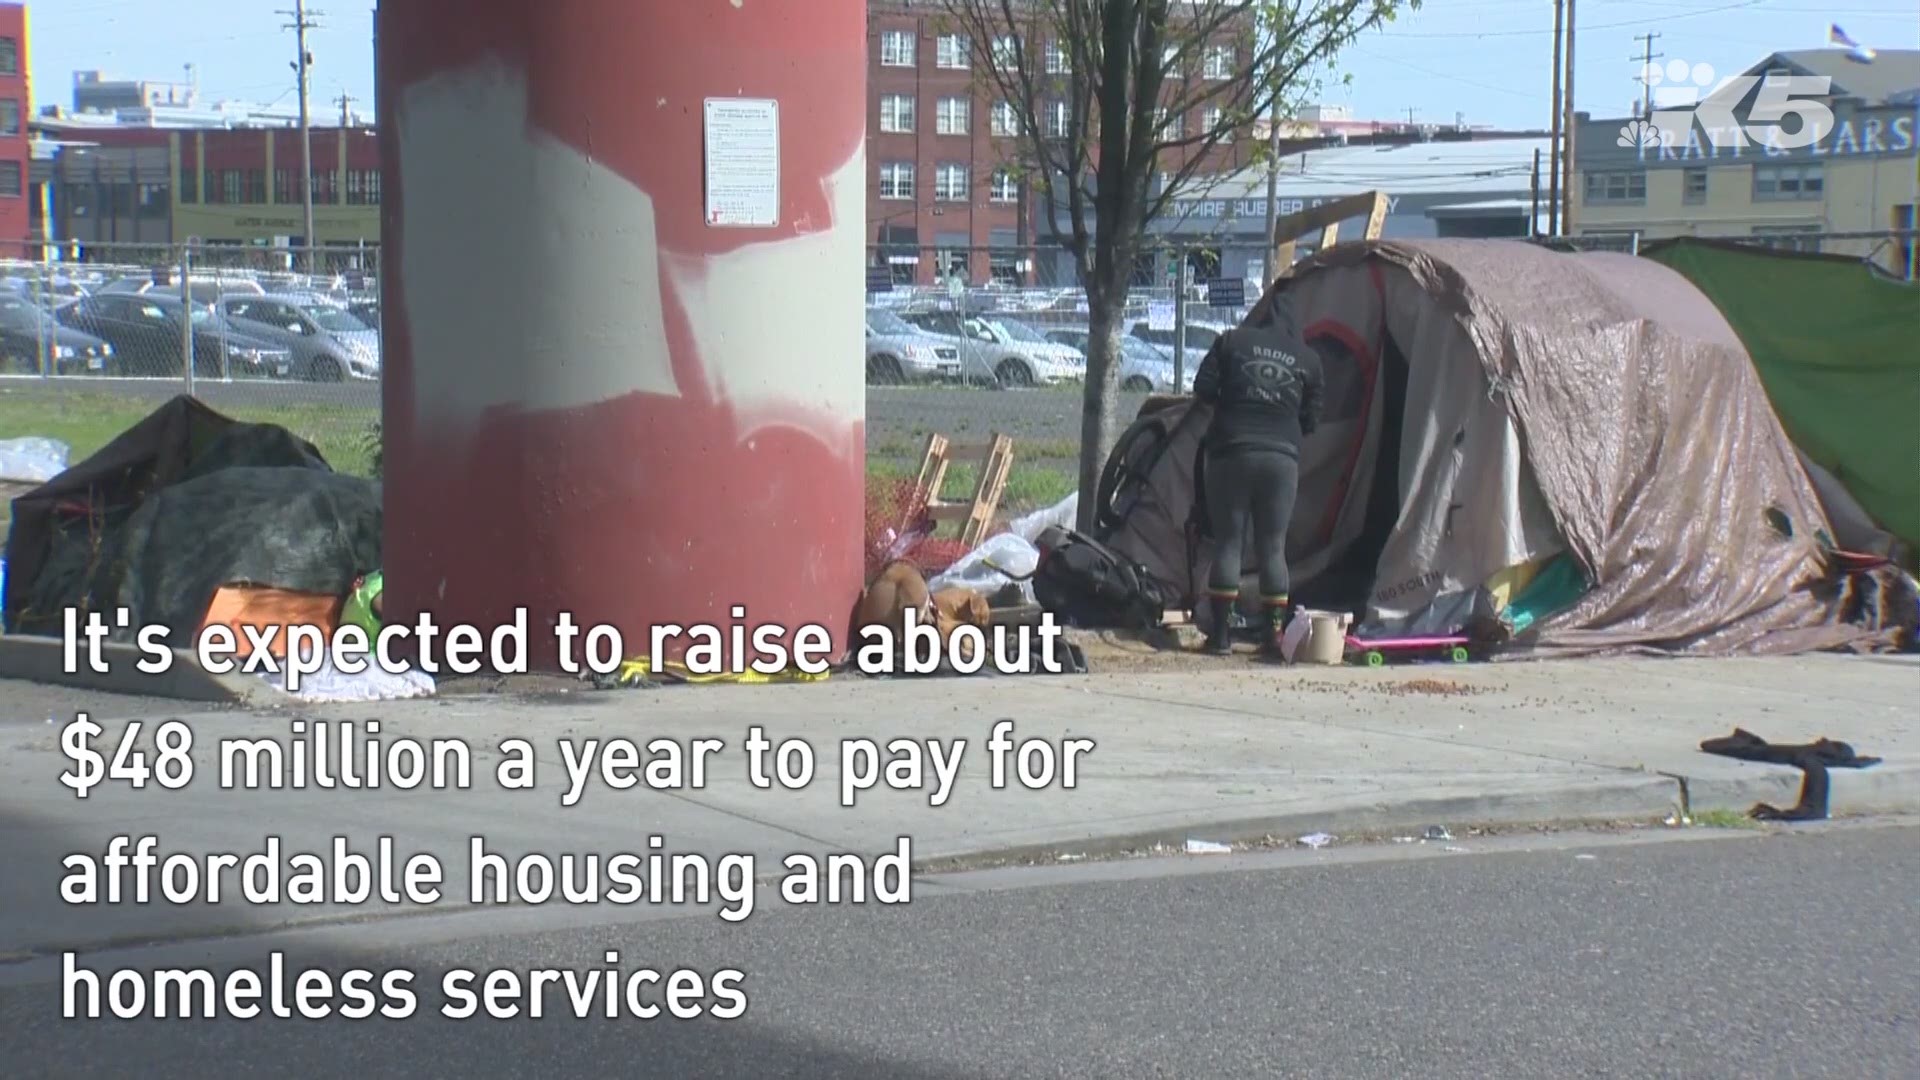 Seattle's employee "head tax" is a hot button issue.  Here is a breakdown of what it means to the homeless community as well as local businesses.